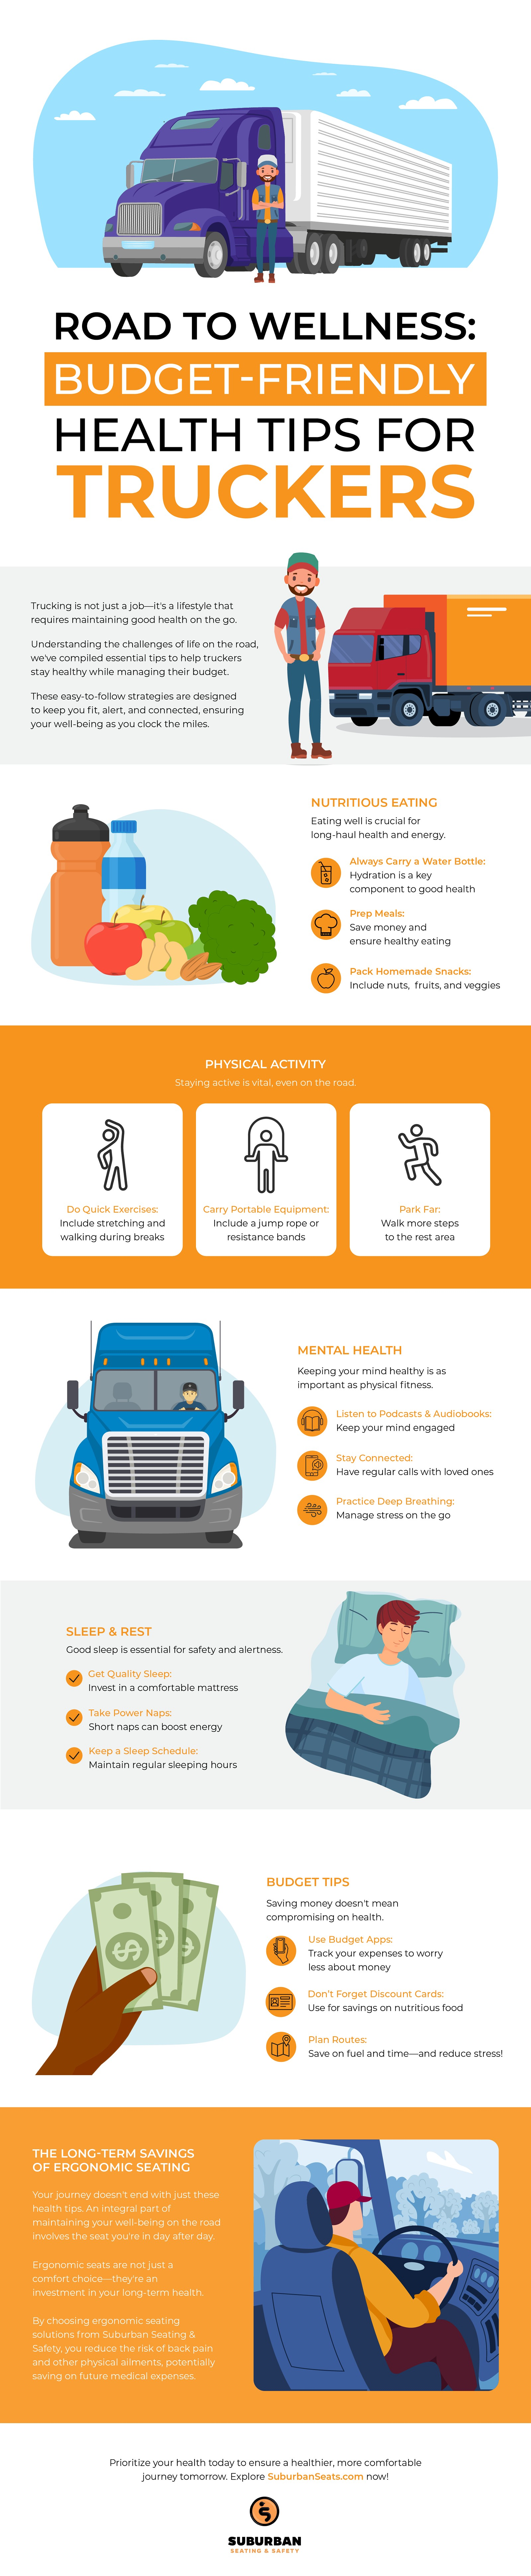 Road to Wellness: Budget-Friendly Health Tips for Truckers